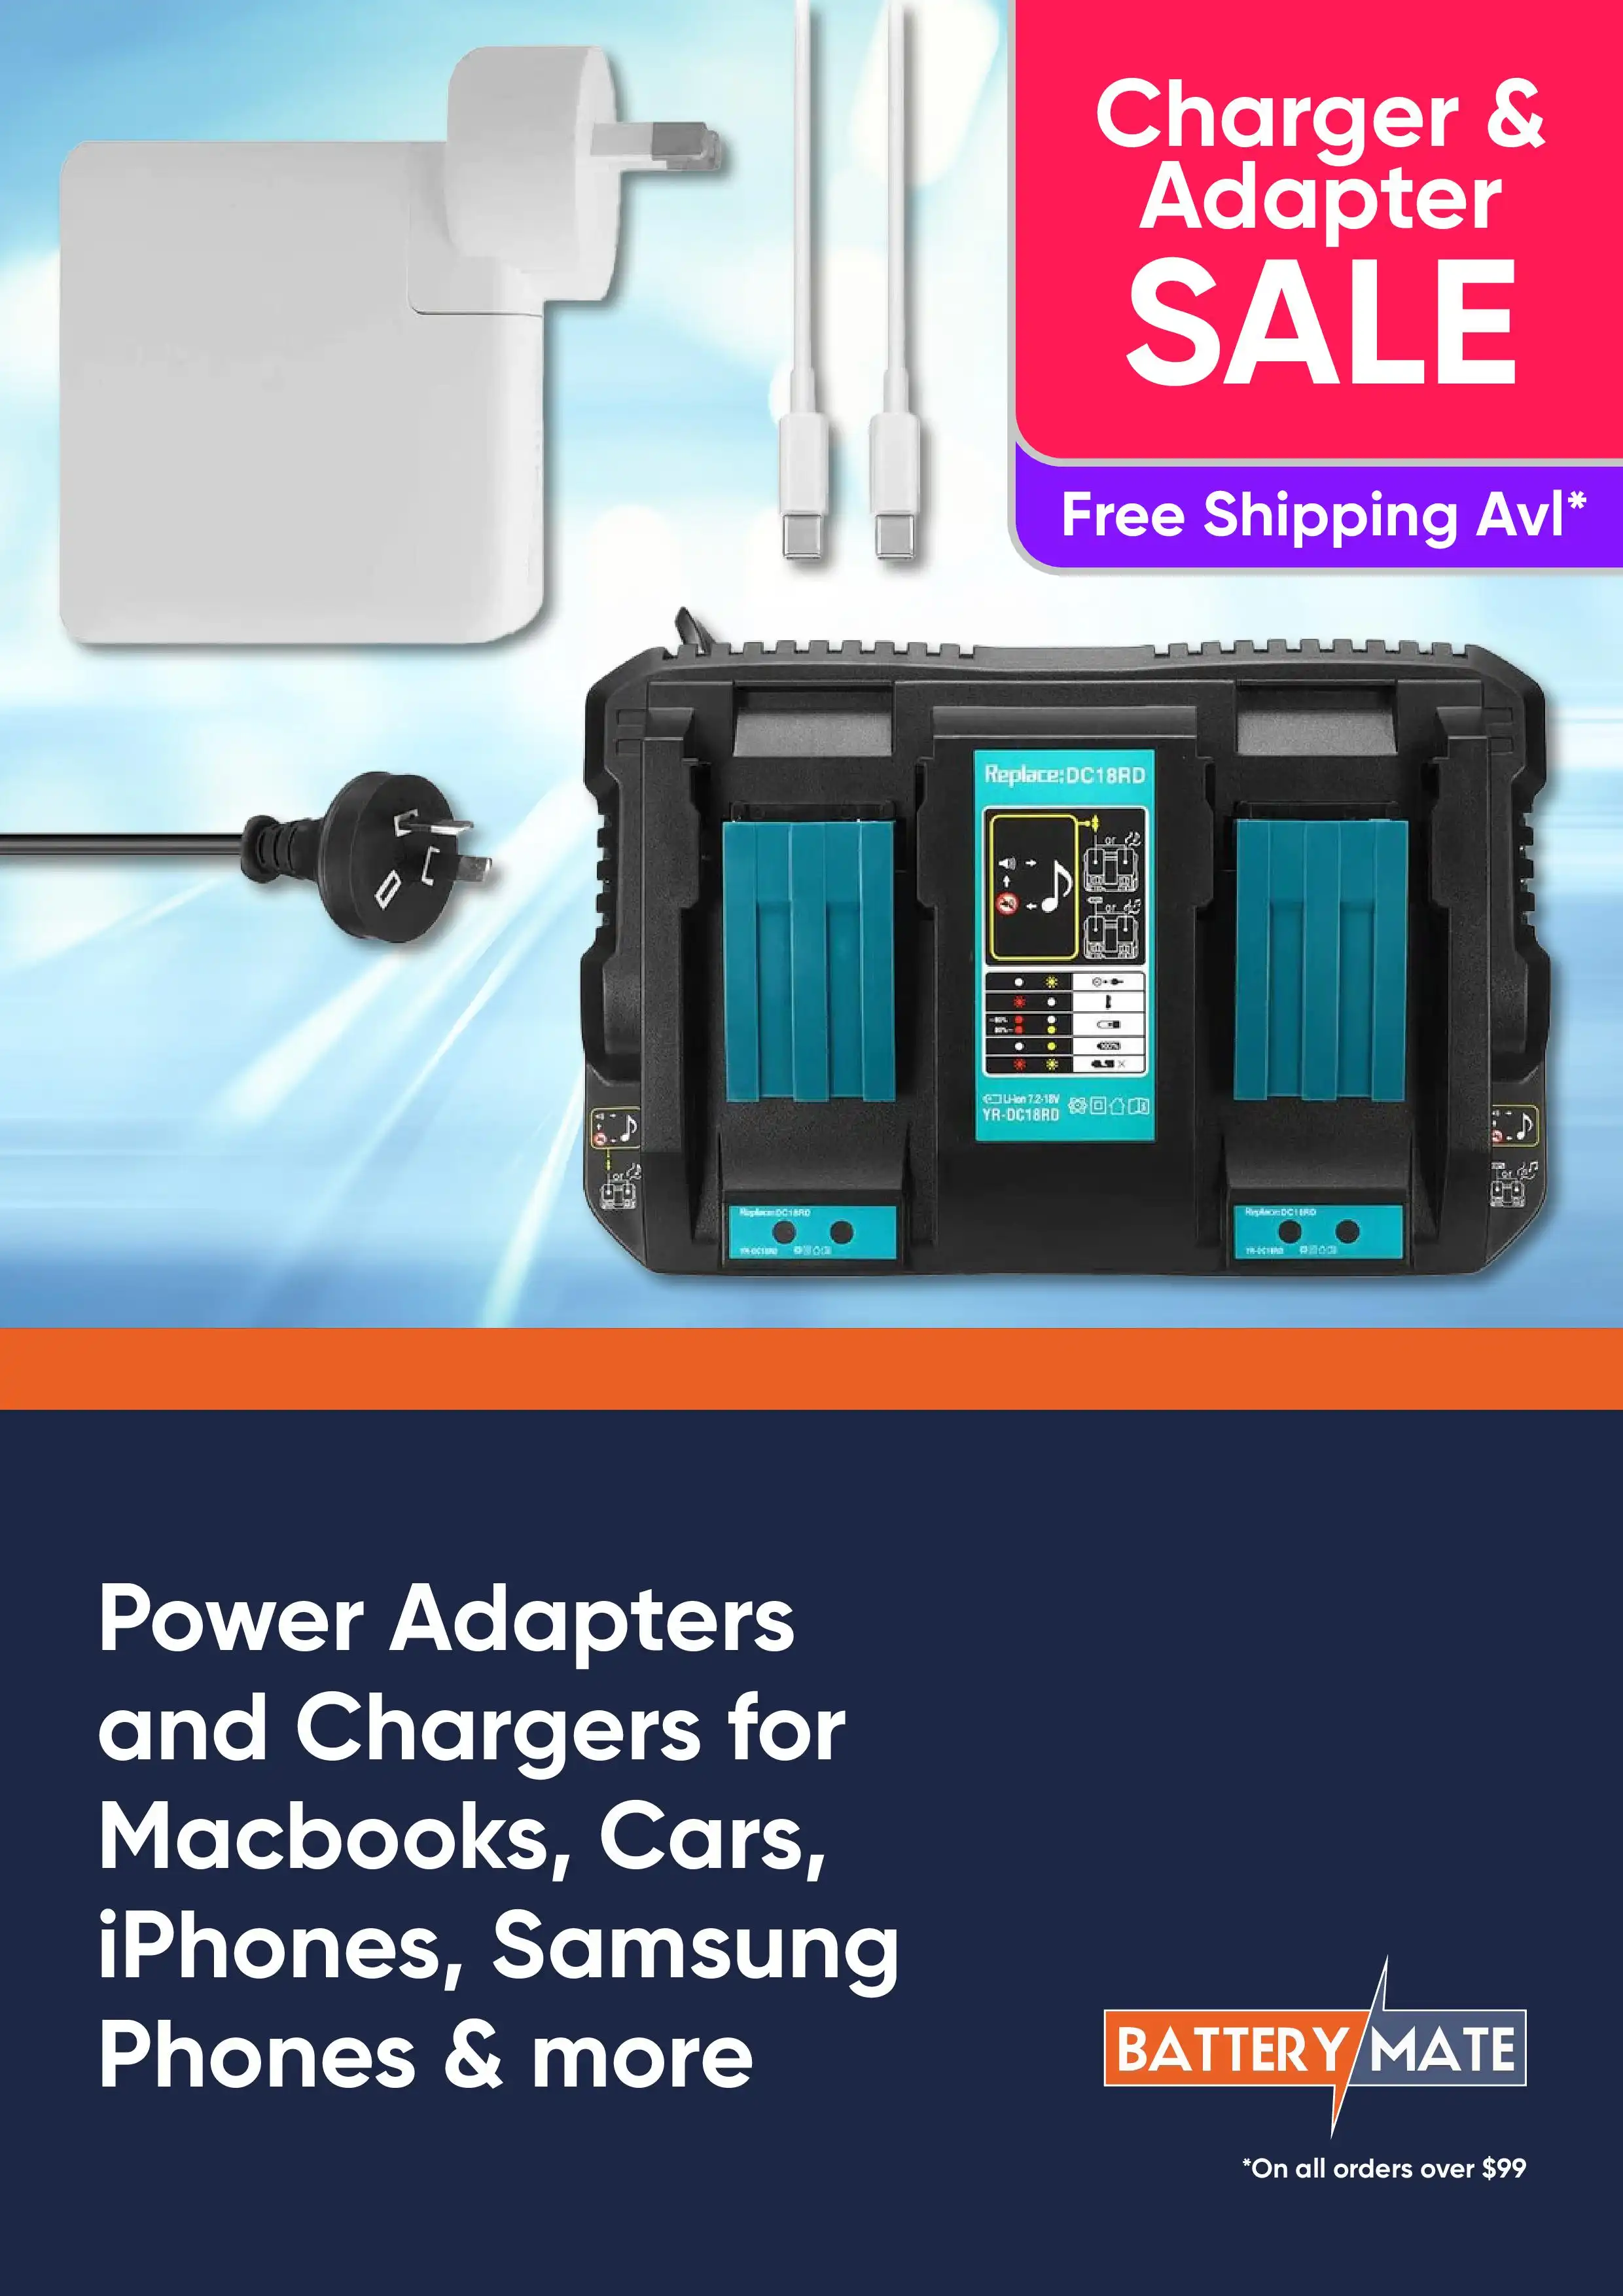 Power Adapters and Chargers for Macbooks, Cars, iPhones, Samsung Phones and More